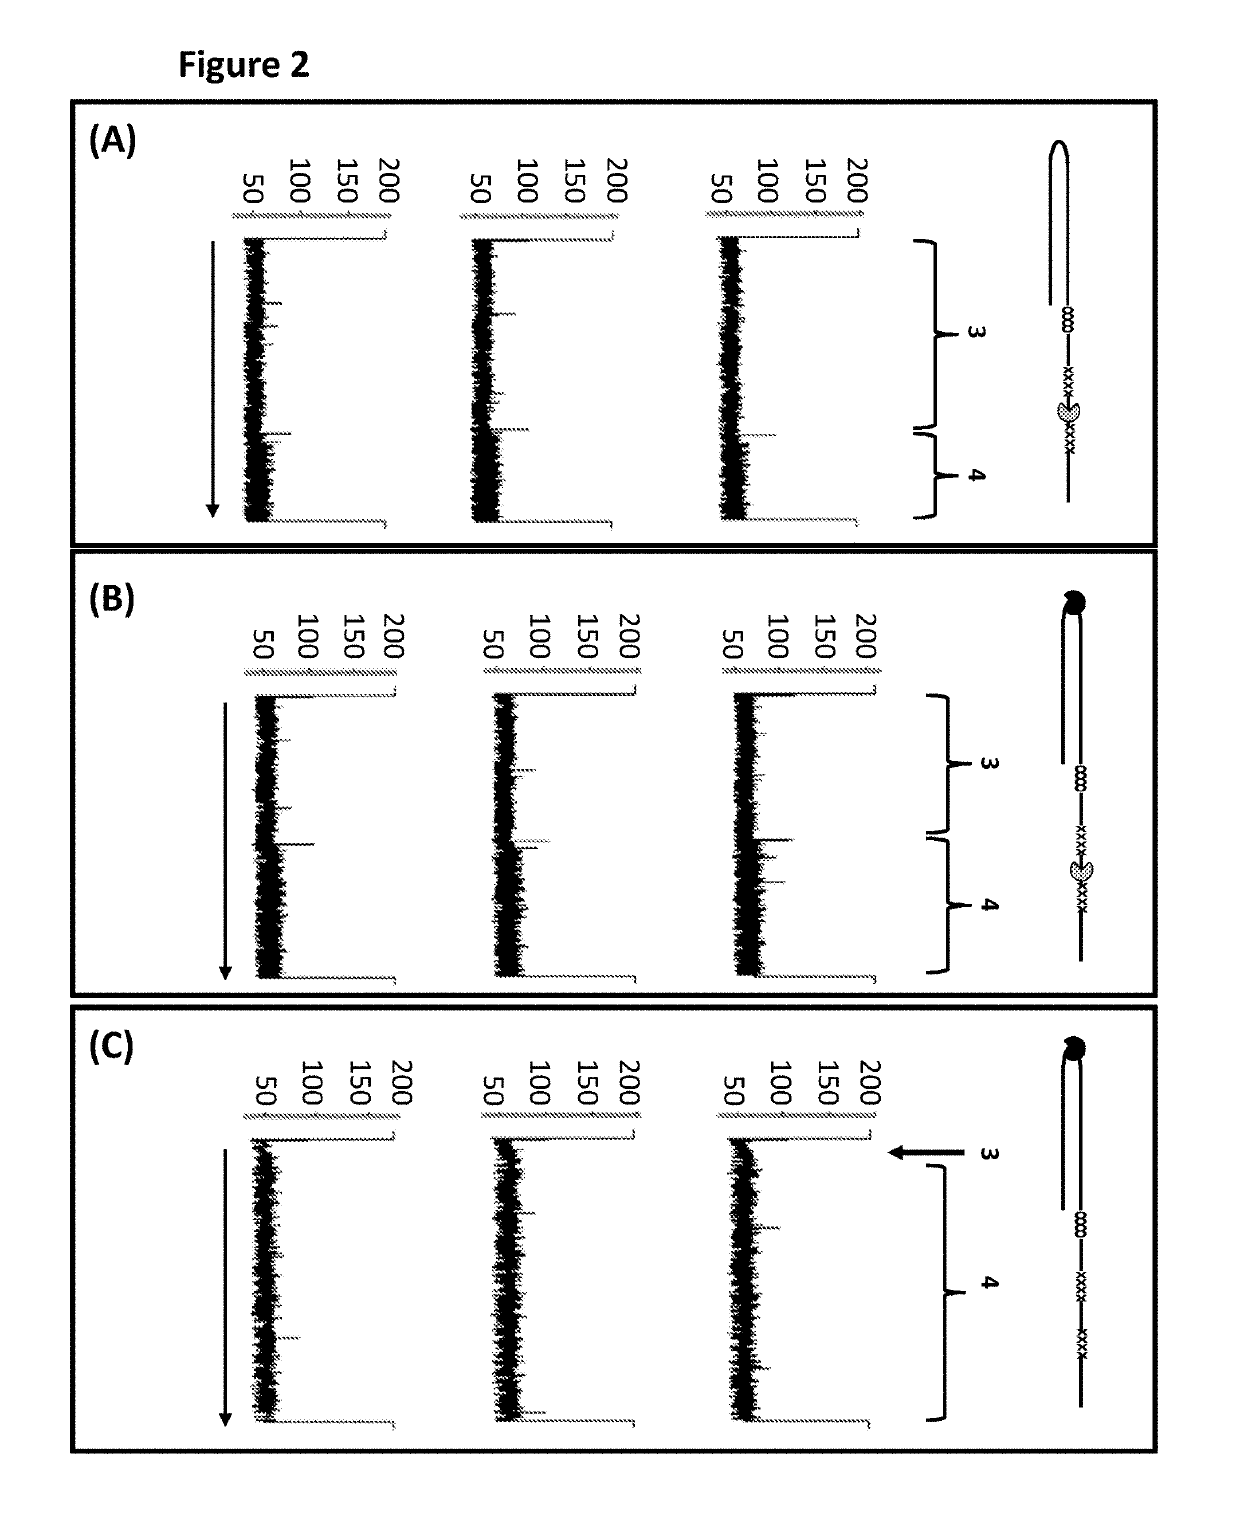 Method for controlling the movement of a polynucleotide through a transmembrane pore